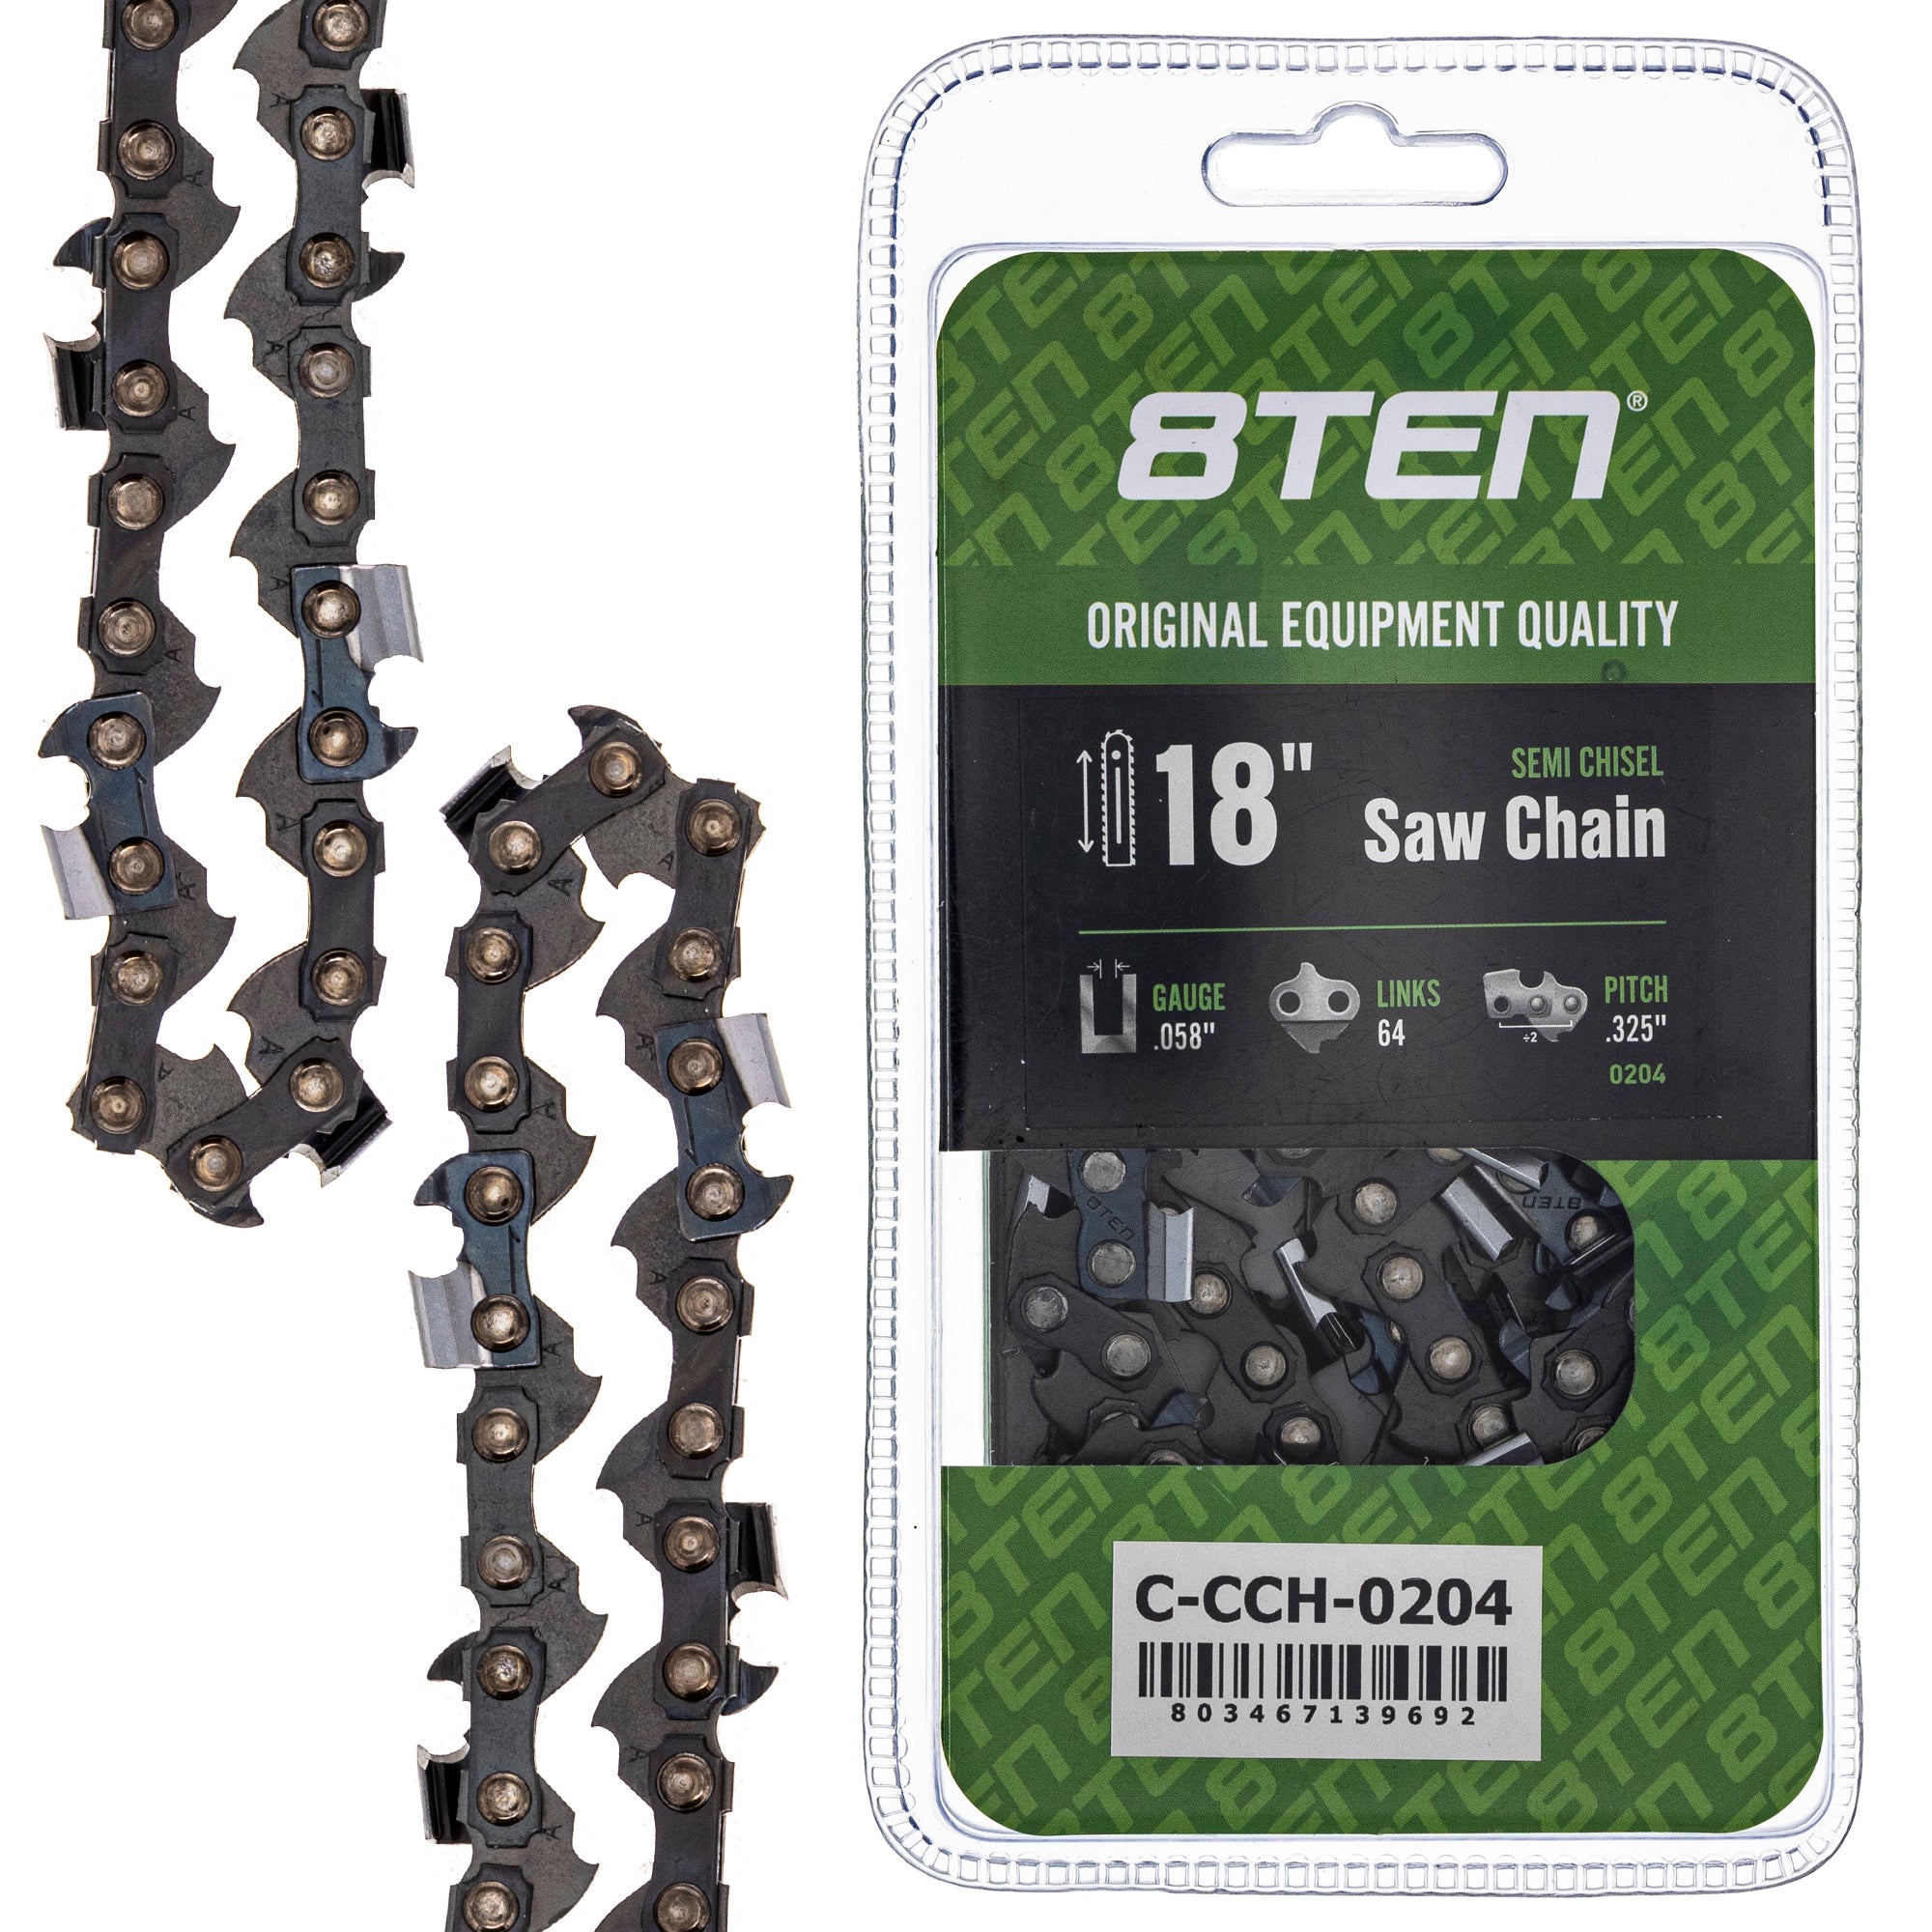 Chainsaw Chain 18 Inch .058 .325 64DL for zOTHER Oregon PS EA6101P53G EA6100PREG 8TEN 810-CCC2426H